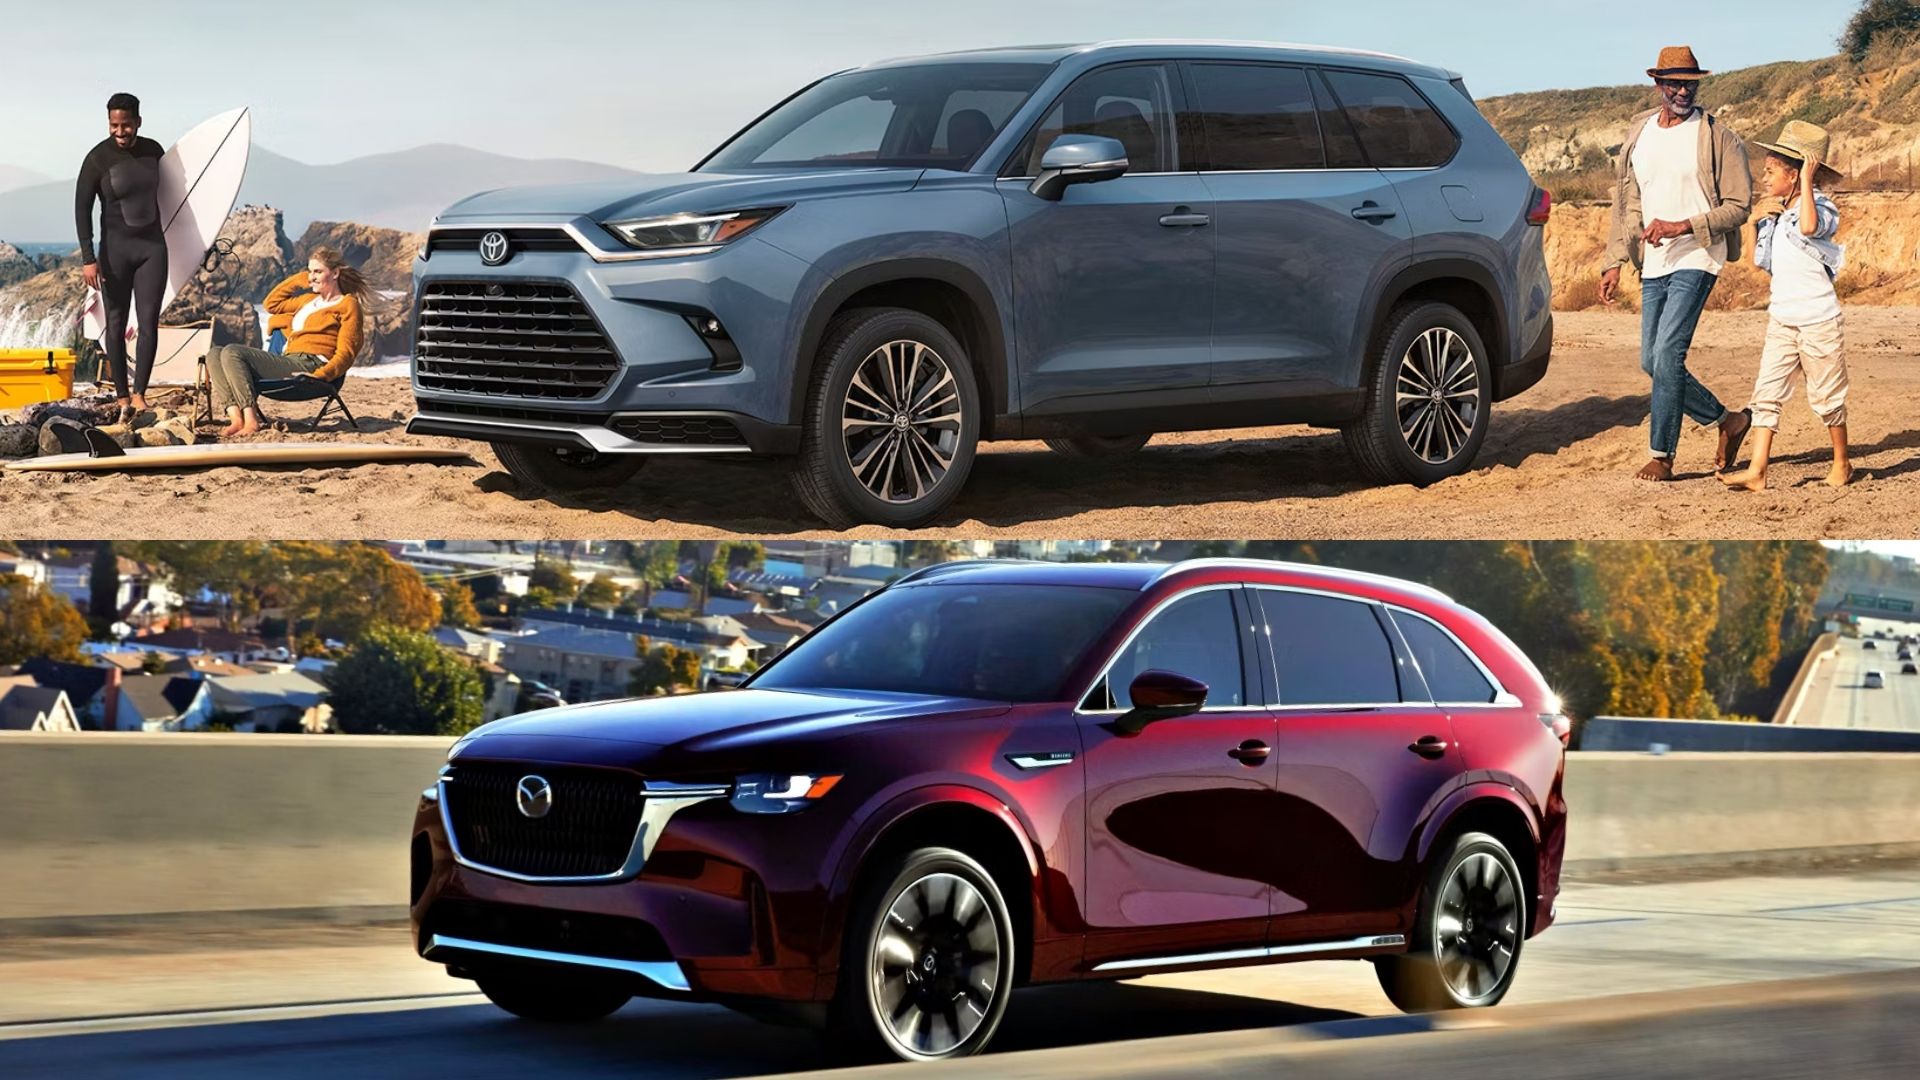 Three quarter outdoor shots of a Toyota and a Mazda SUV on the beach and on the road respectively